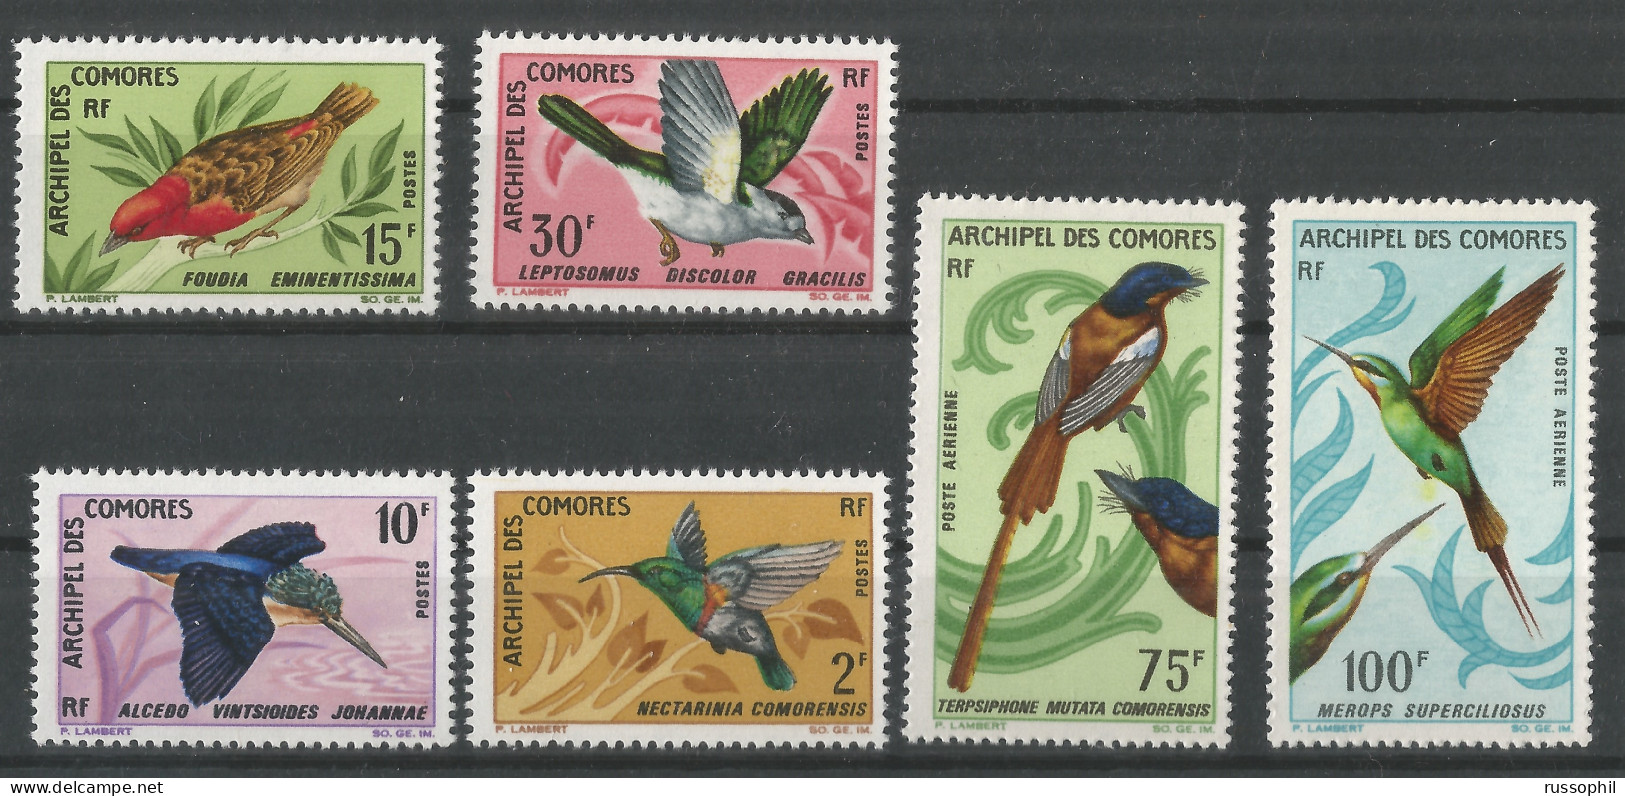 COMORES - OISEAUX - BIRDS -  Yv. #41 TO Yv. #44 AND Yv. #PA20 AND Yv. #PA21 -  (**/MNH) - 1967 - Nuovi